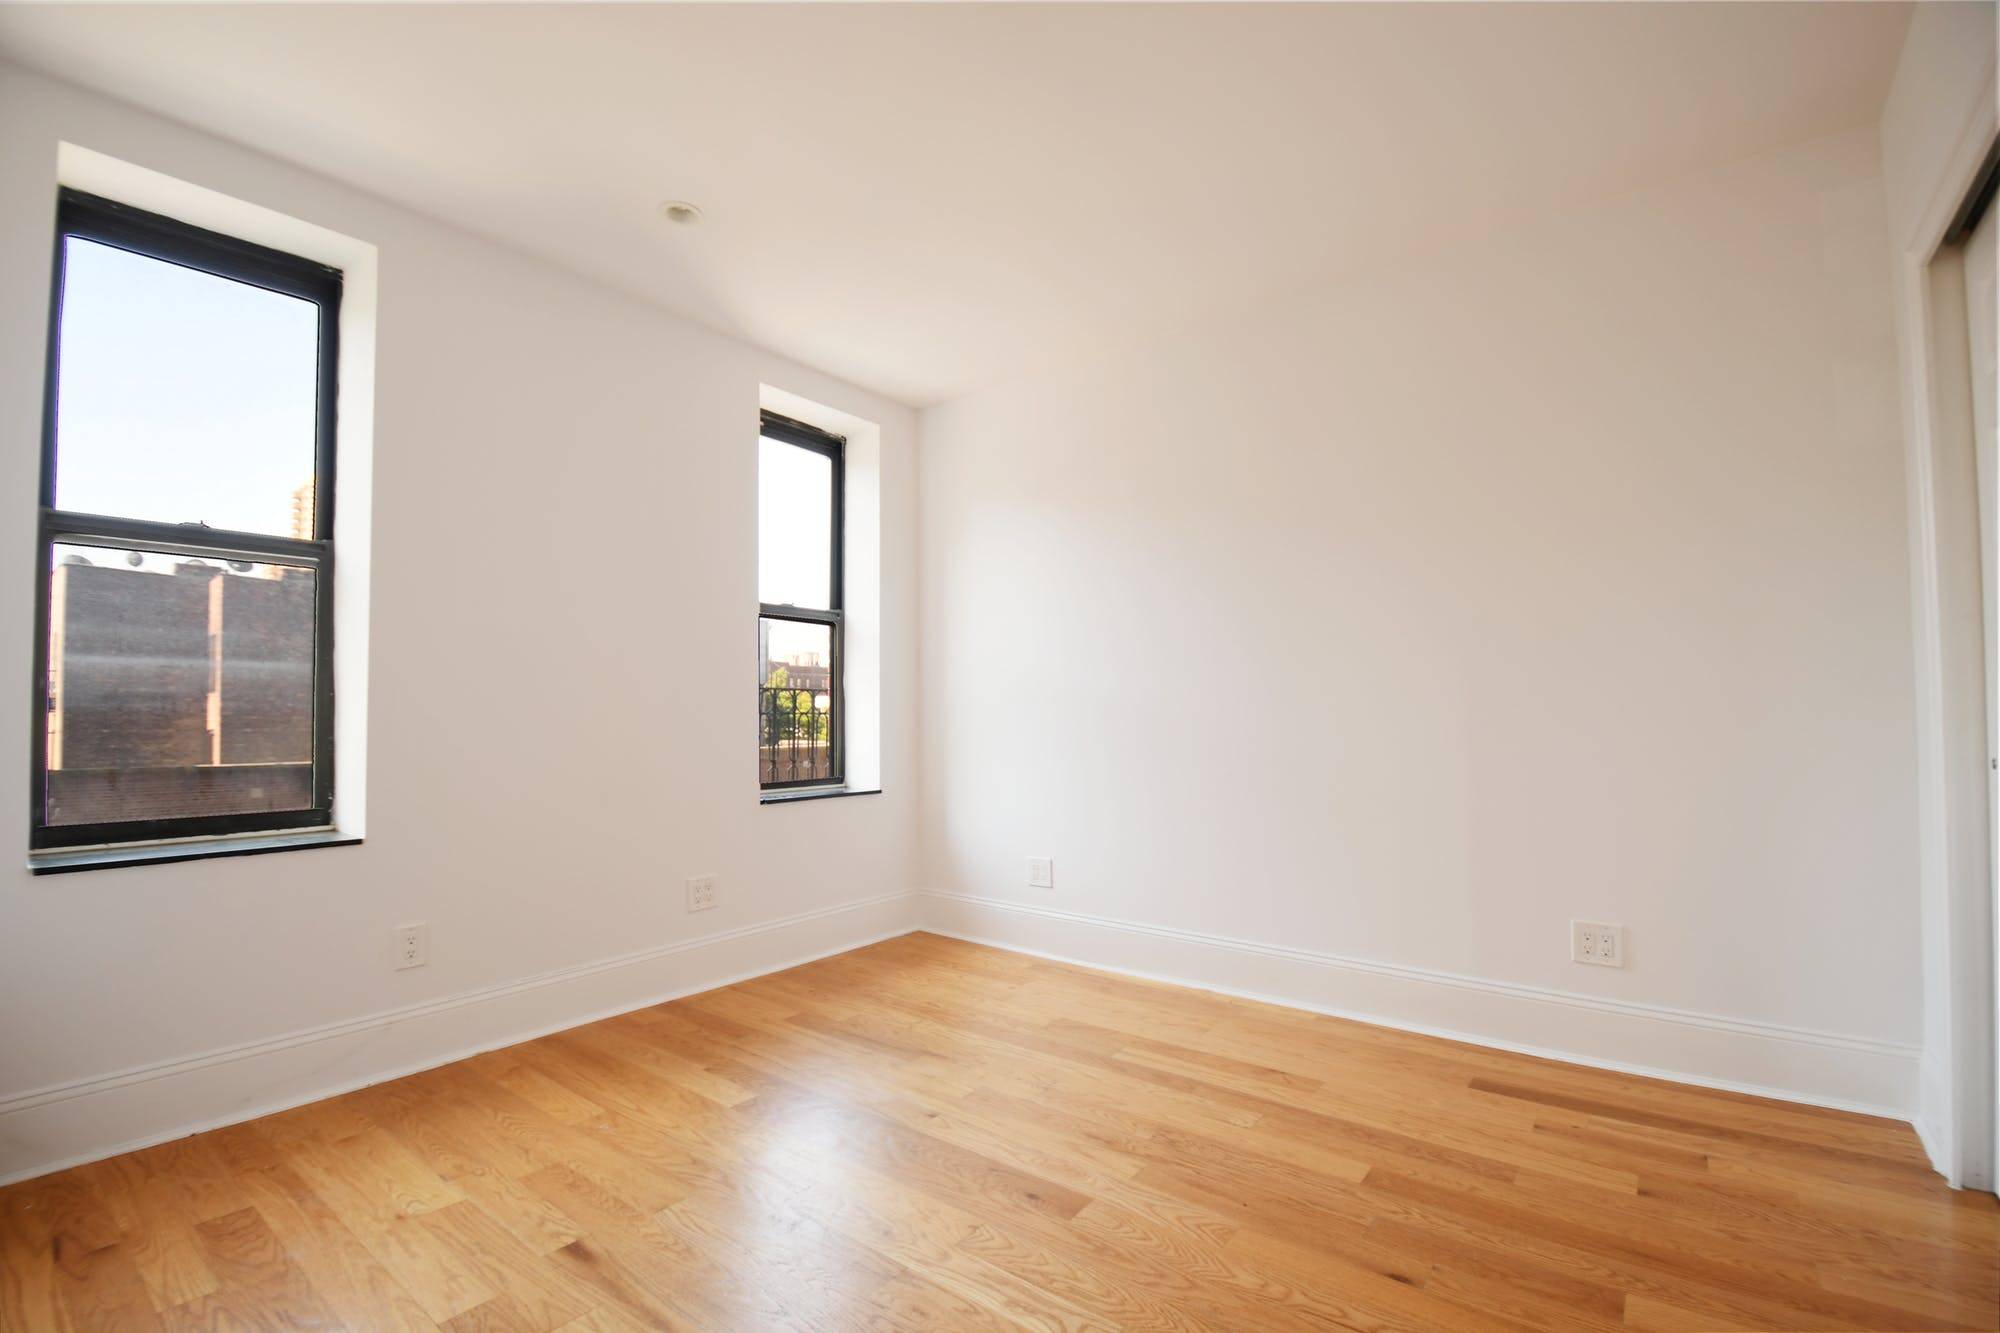 No Brokers Fee 1 Month Free 3667 net, 4000 gross 1059 Union Street is a collective of luxury rental apartments, pridefully overlooking Prospect Park in prime Crown Heights.